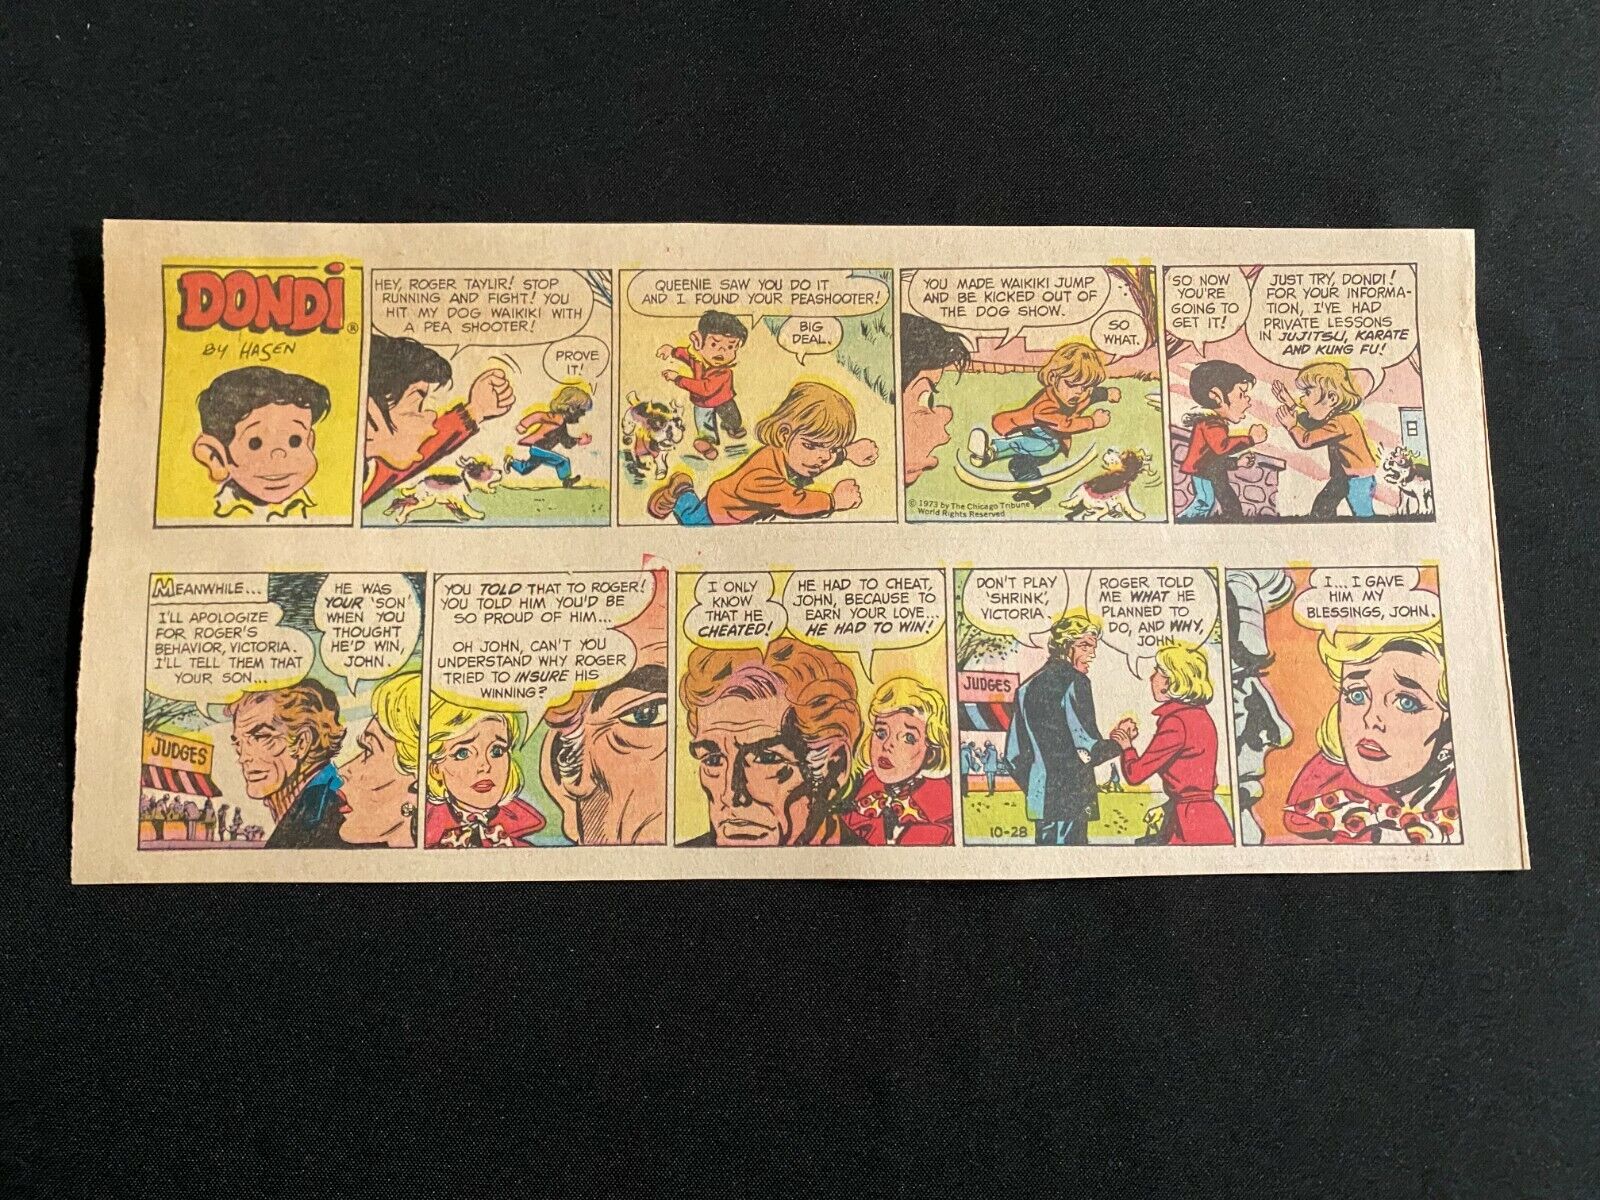 21H DONDI by Irwin Hasen Lot of 4 Sunday Third Page Comic Strips 1973 | eBay